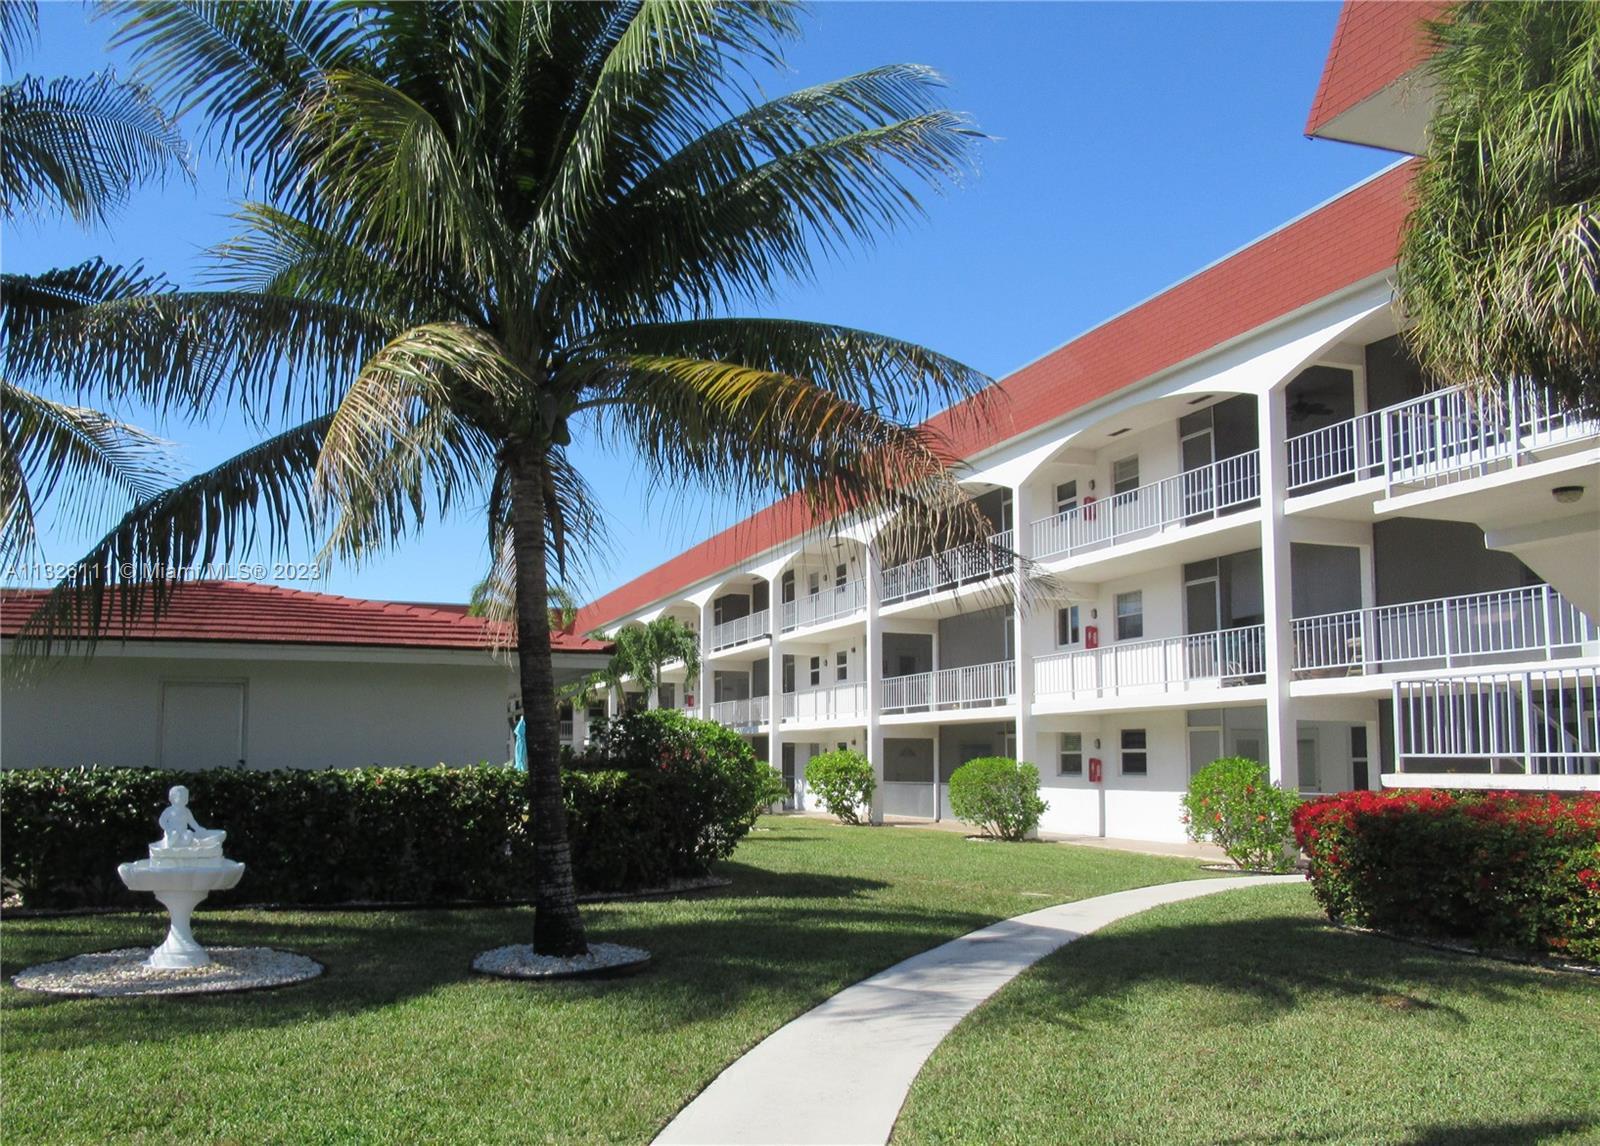 MOVE-IN READY, RENOVATED 2 bedrooms / 2 bathrooms ground floor unit with screened porch. Hurricane w